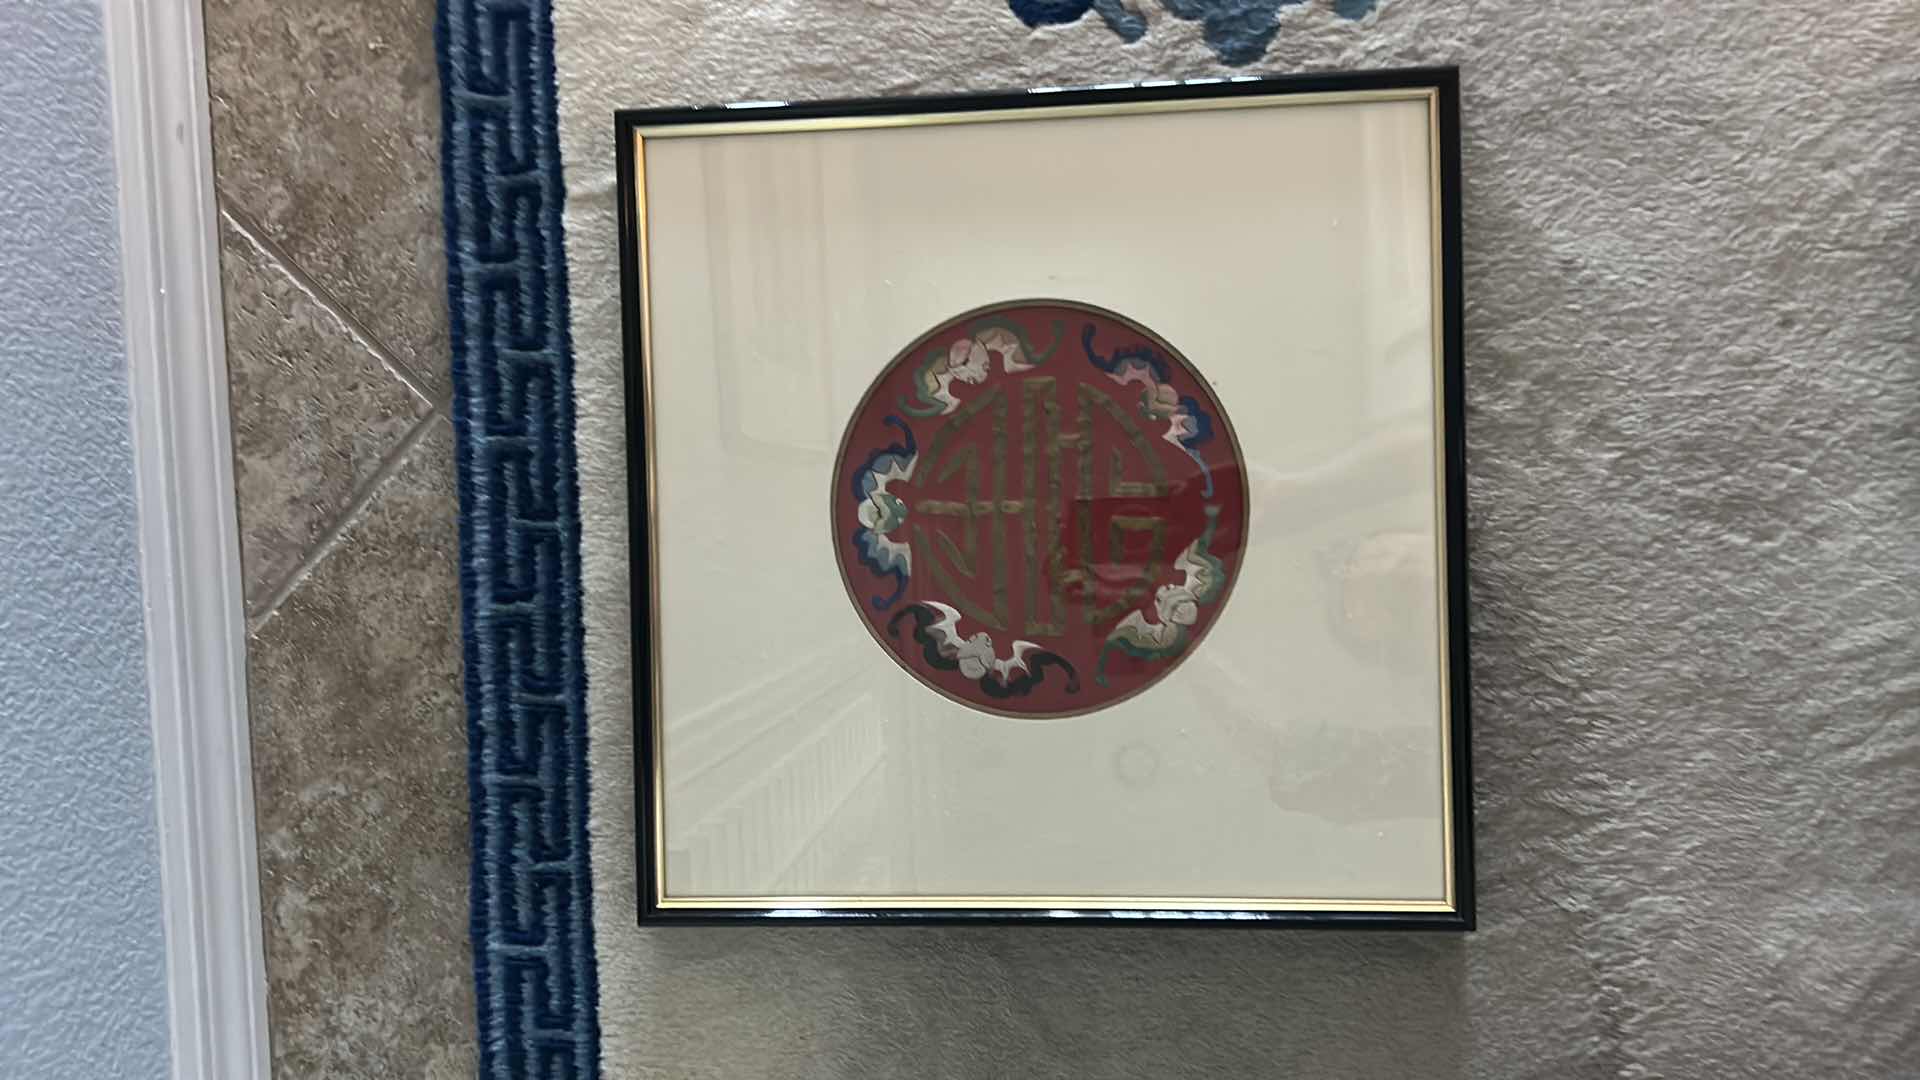 Photo 5 of ANTIQUE CHINESE TEXTILE FABRIC, SILK WITH SILK THREAD HAND EMBROIDERY ARTWORK FRAMED 18” x 18”